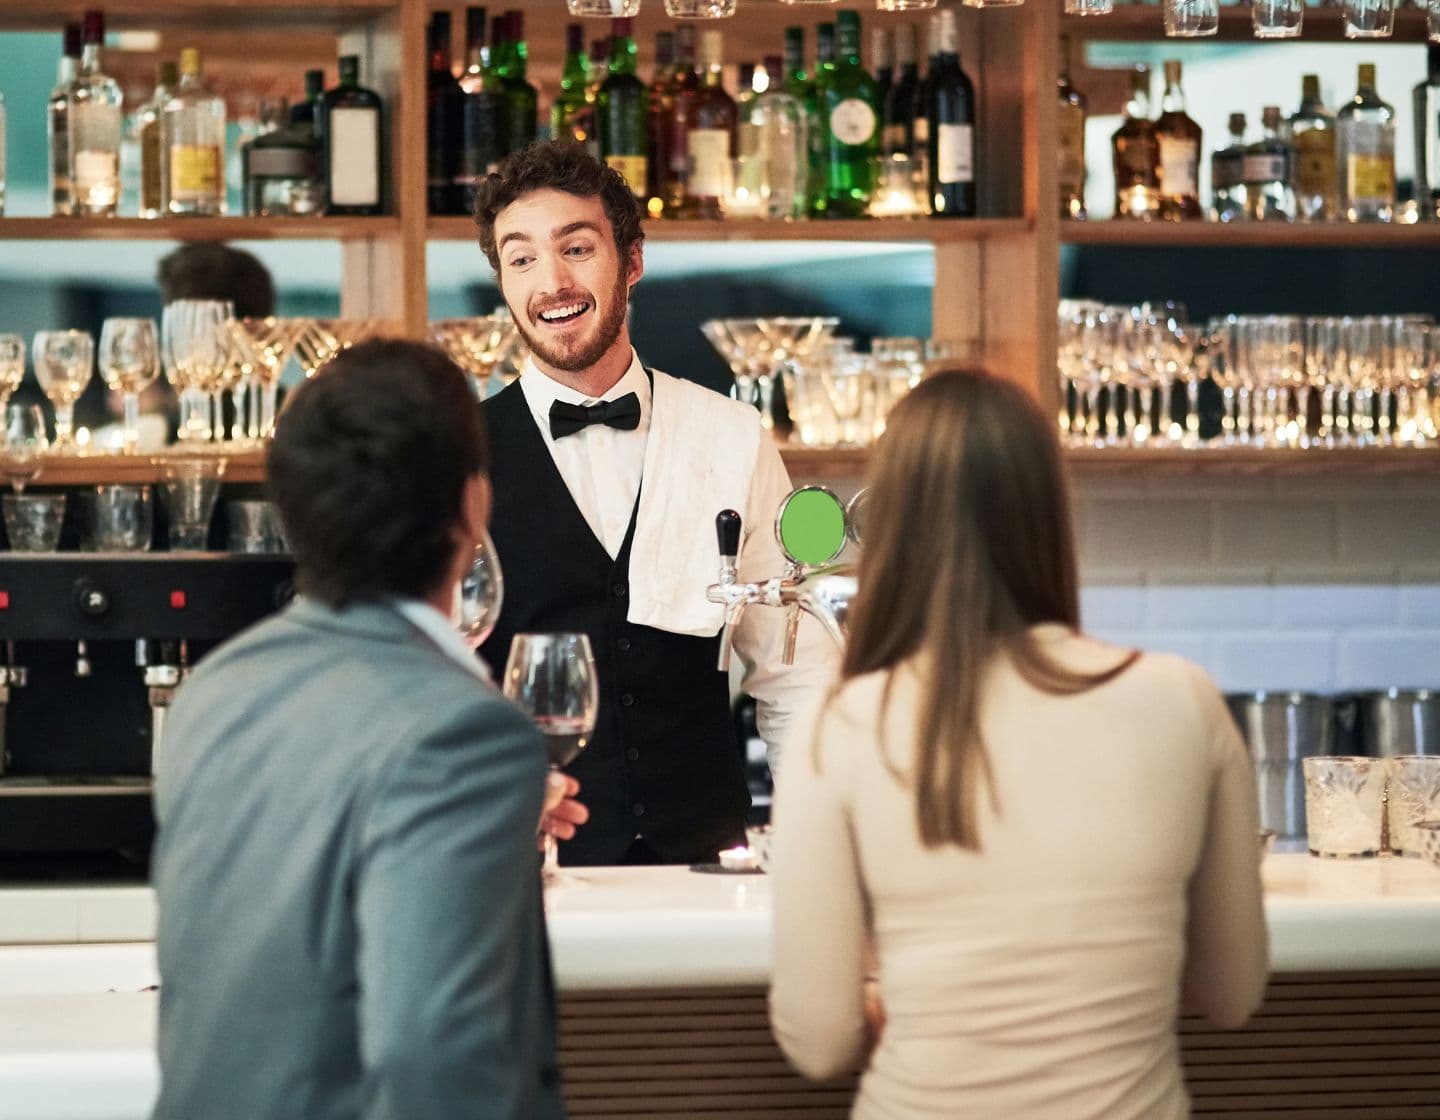 Bartender interacting with guests and smiling  